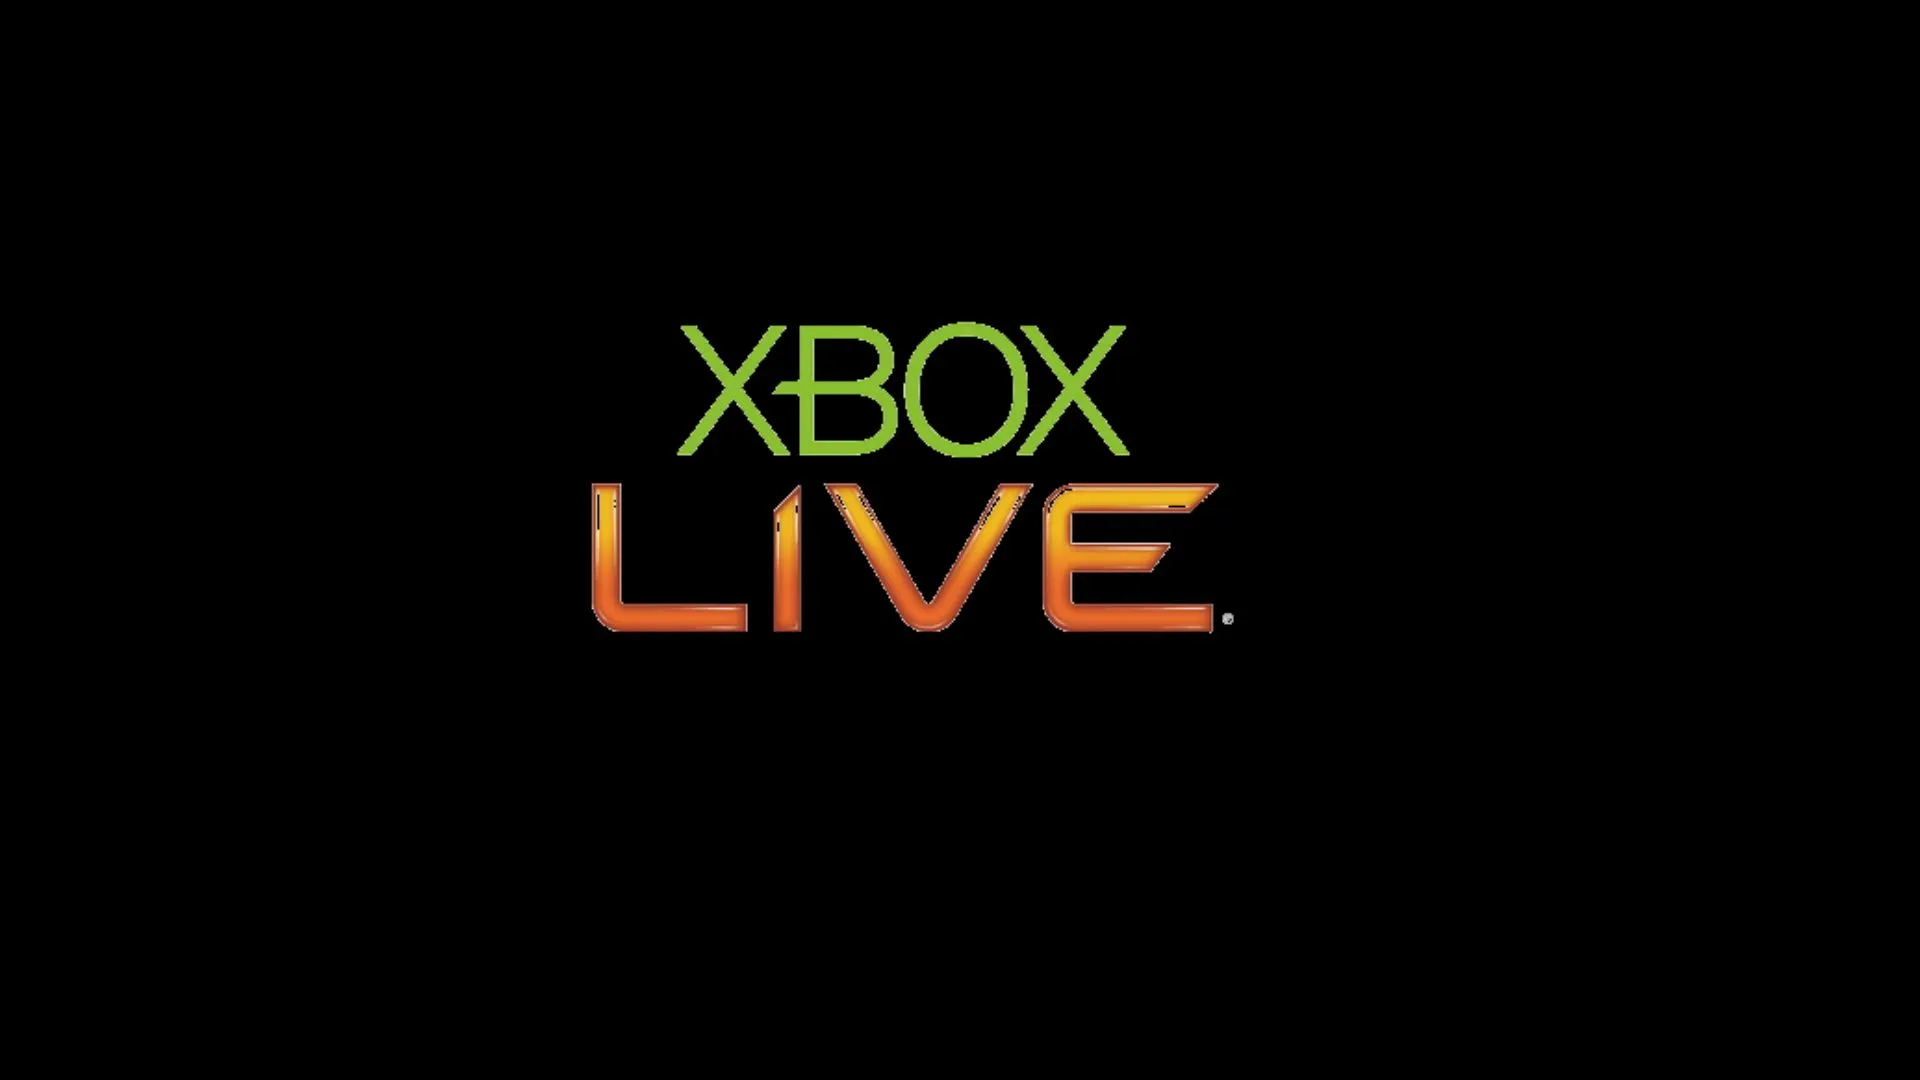 Xbox Live Outage Disrupts Service for Nearly Seven Hours